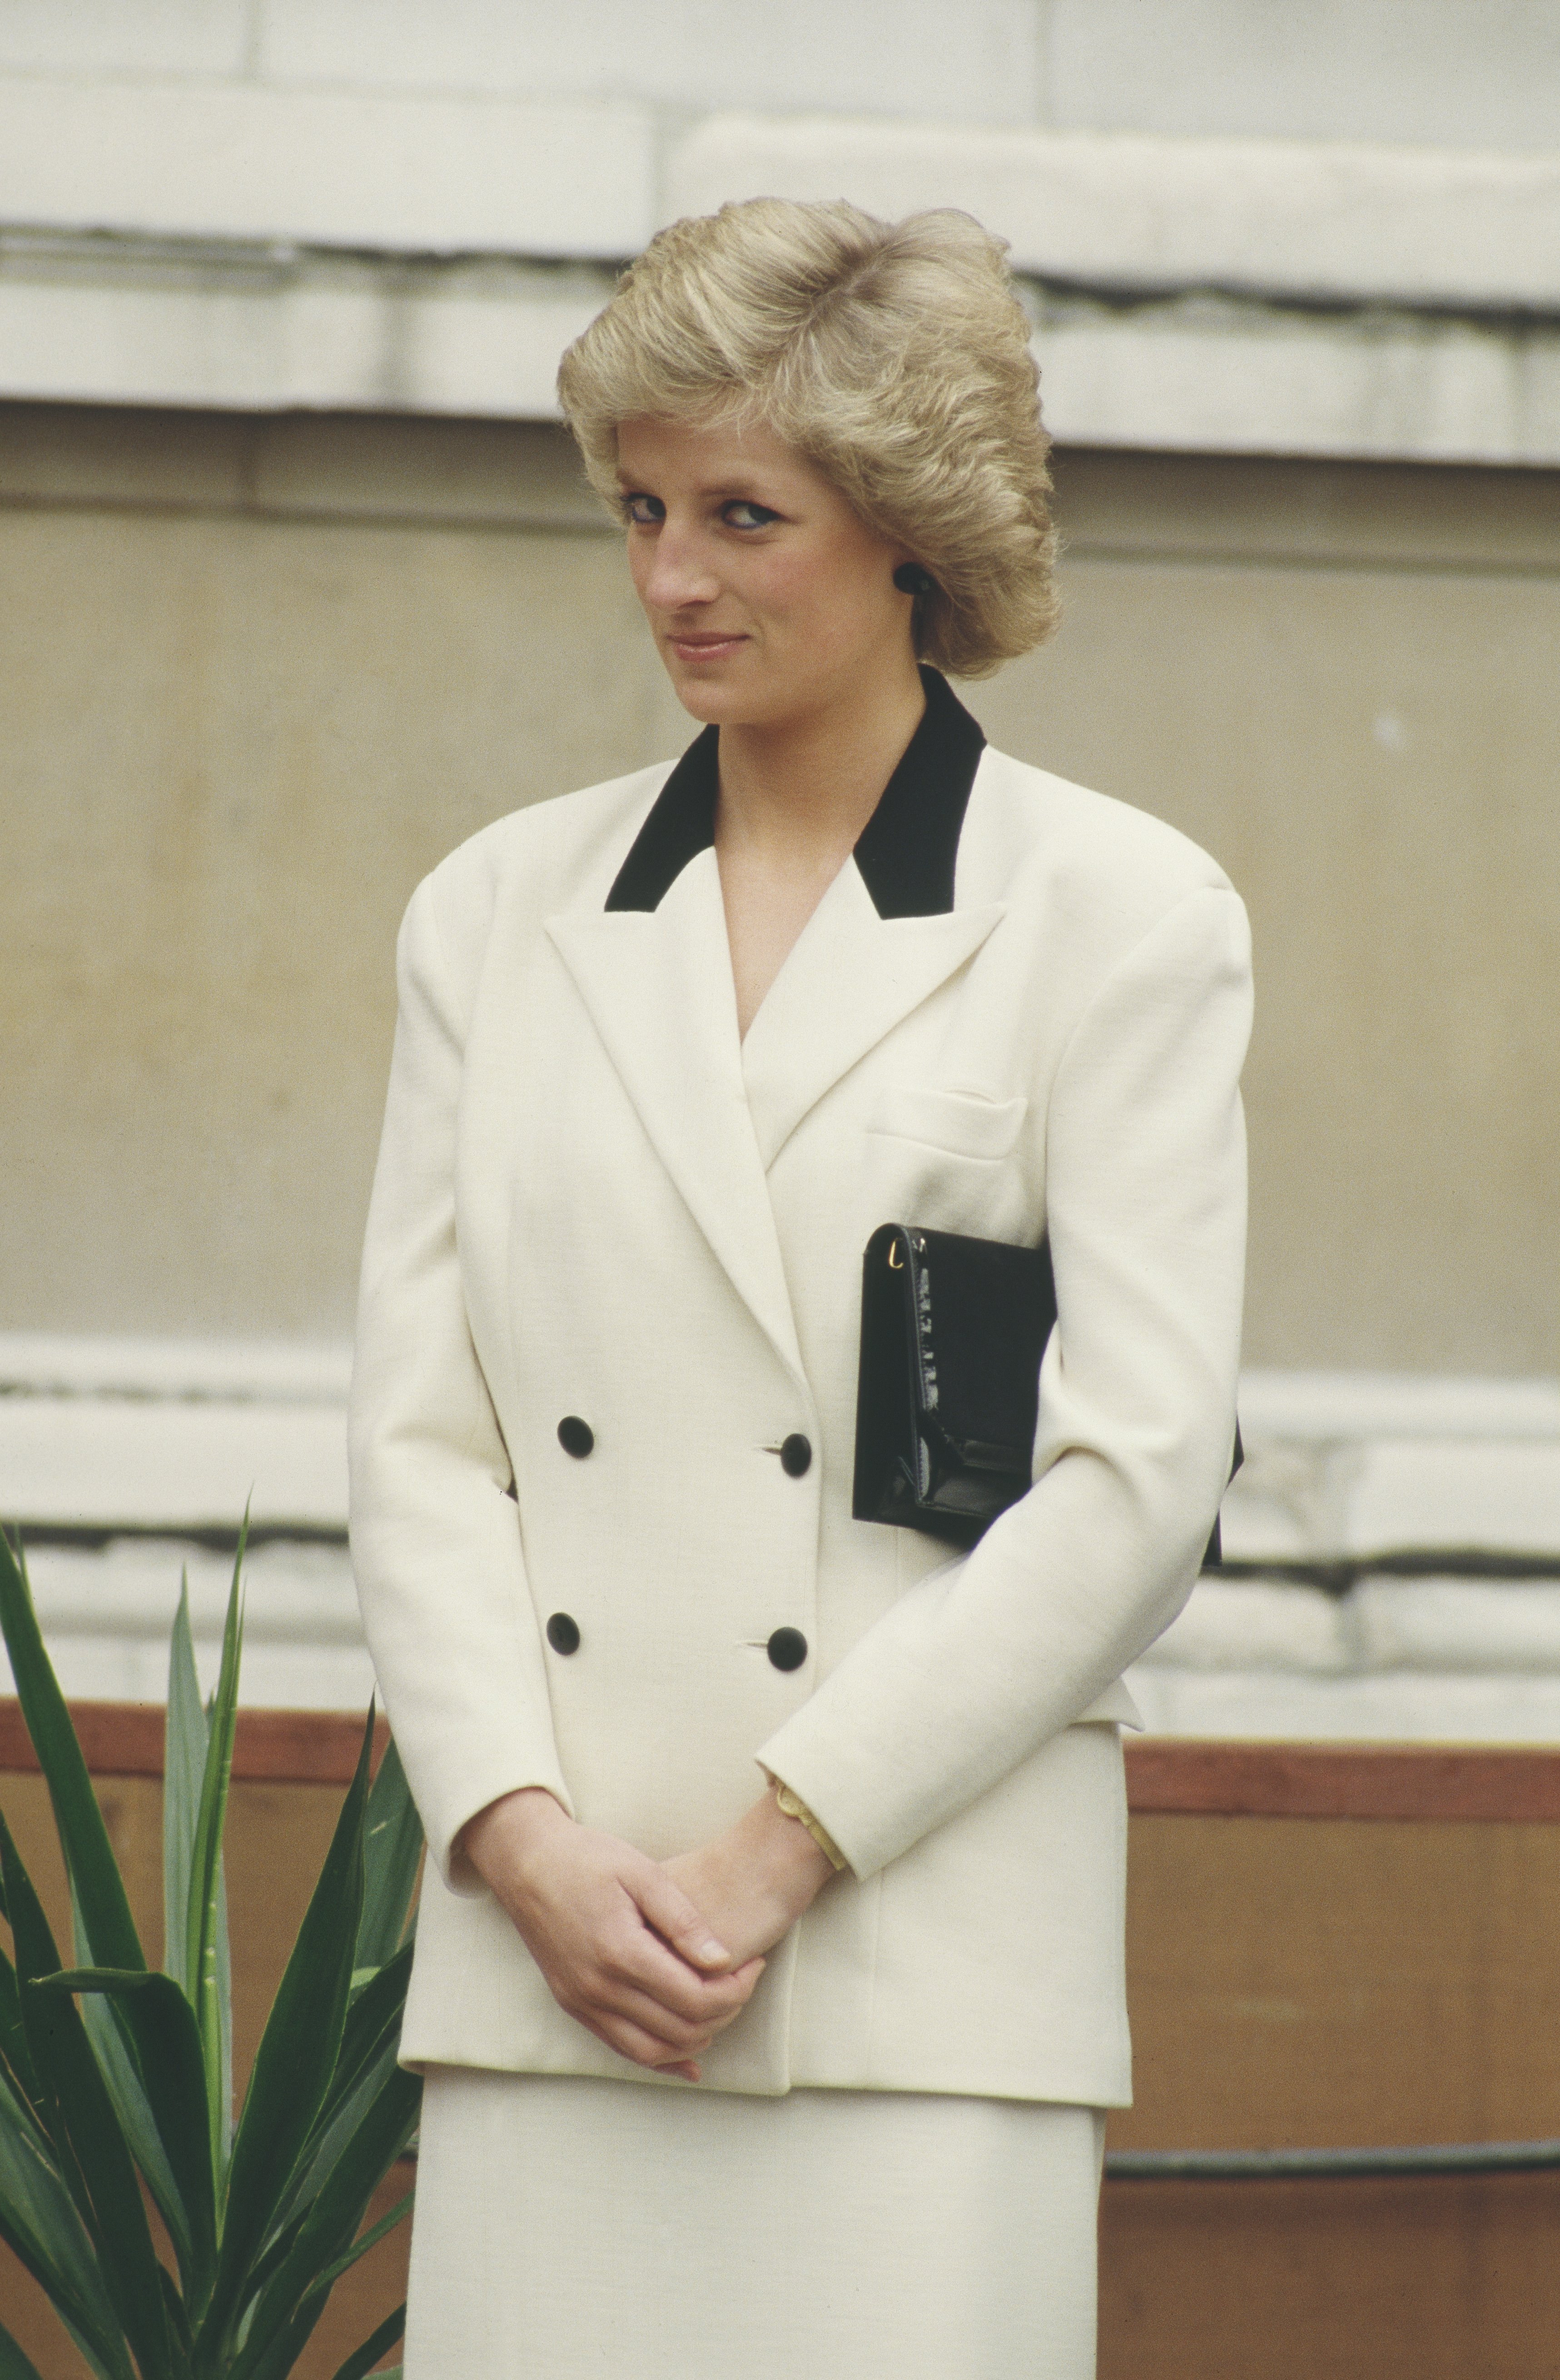 Diana, Princess of Wales, lays the foundation stone of the new Sainsbury Wing at the National Gallery in London, 30th March 1988. | Source: Getty Images